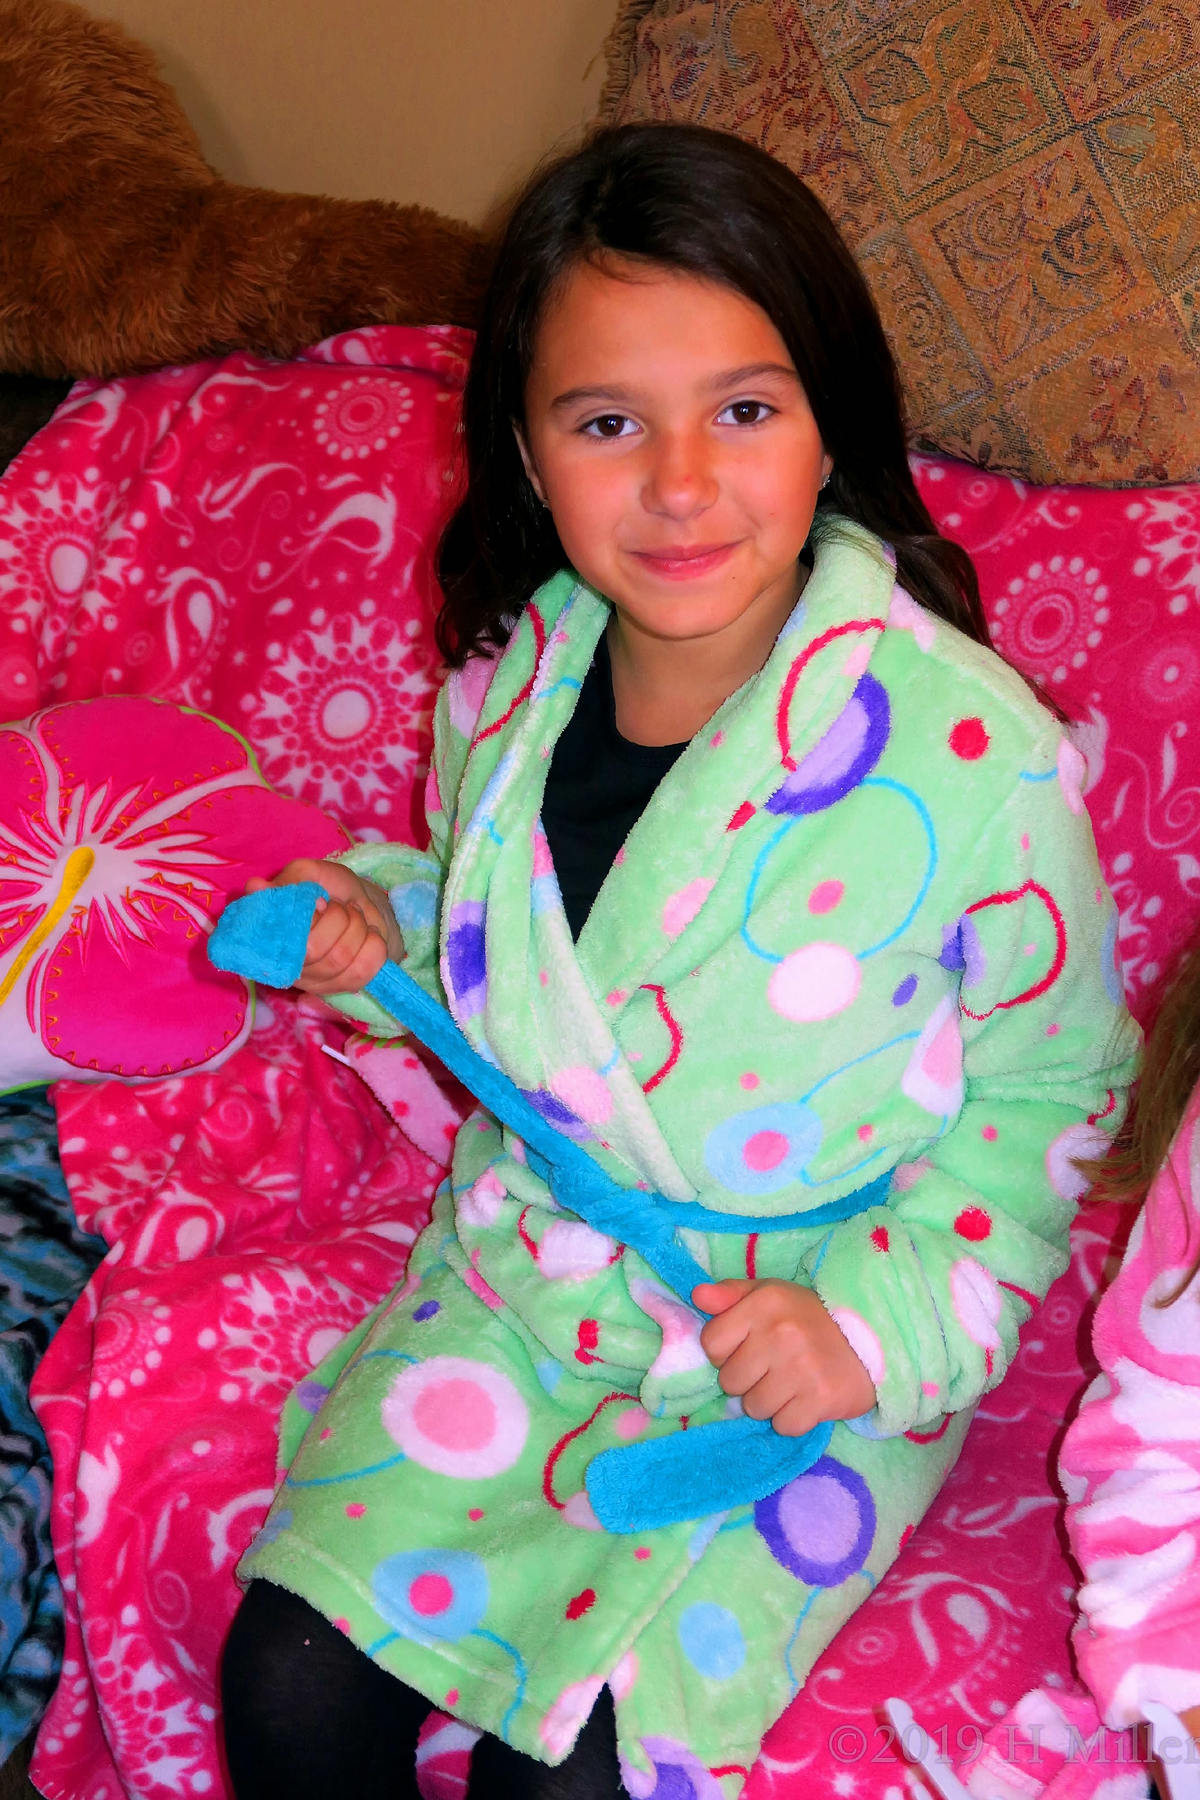 Tying It Tight! Party Guest Poses In Kids Spa Robe! 